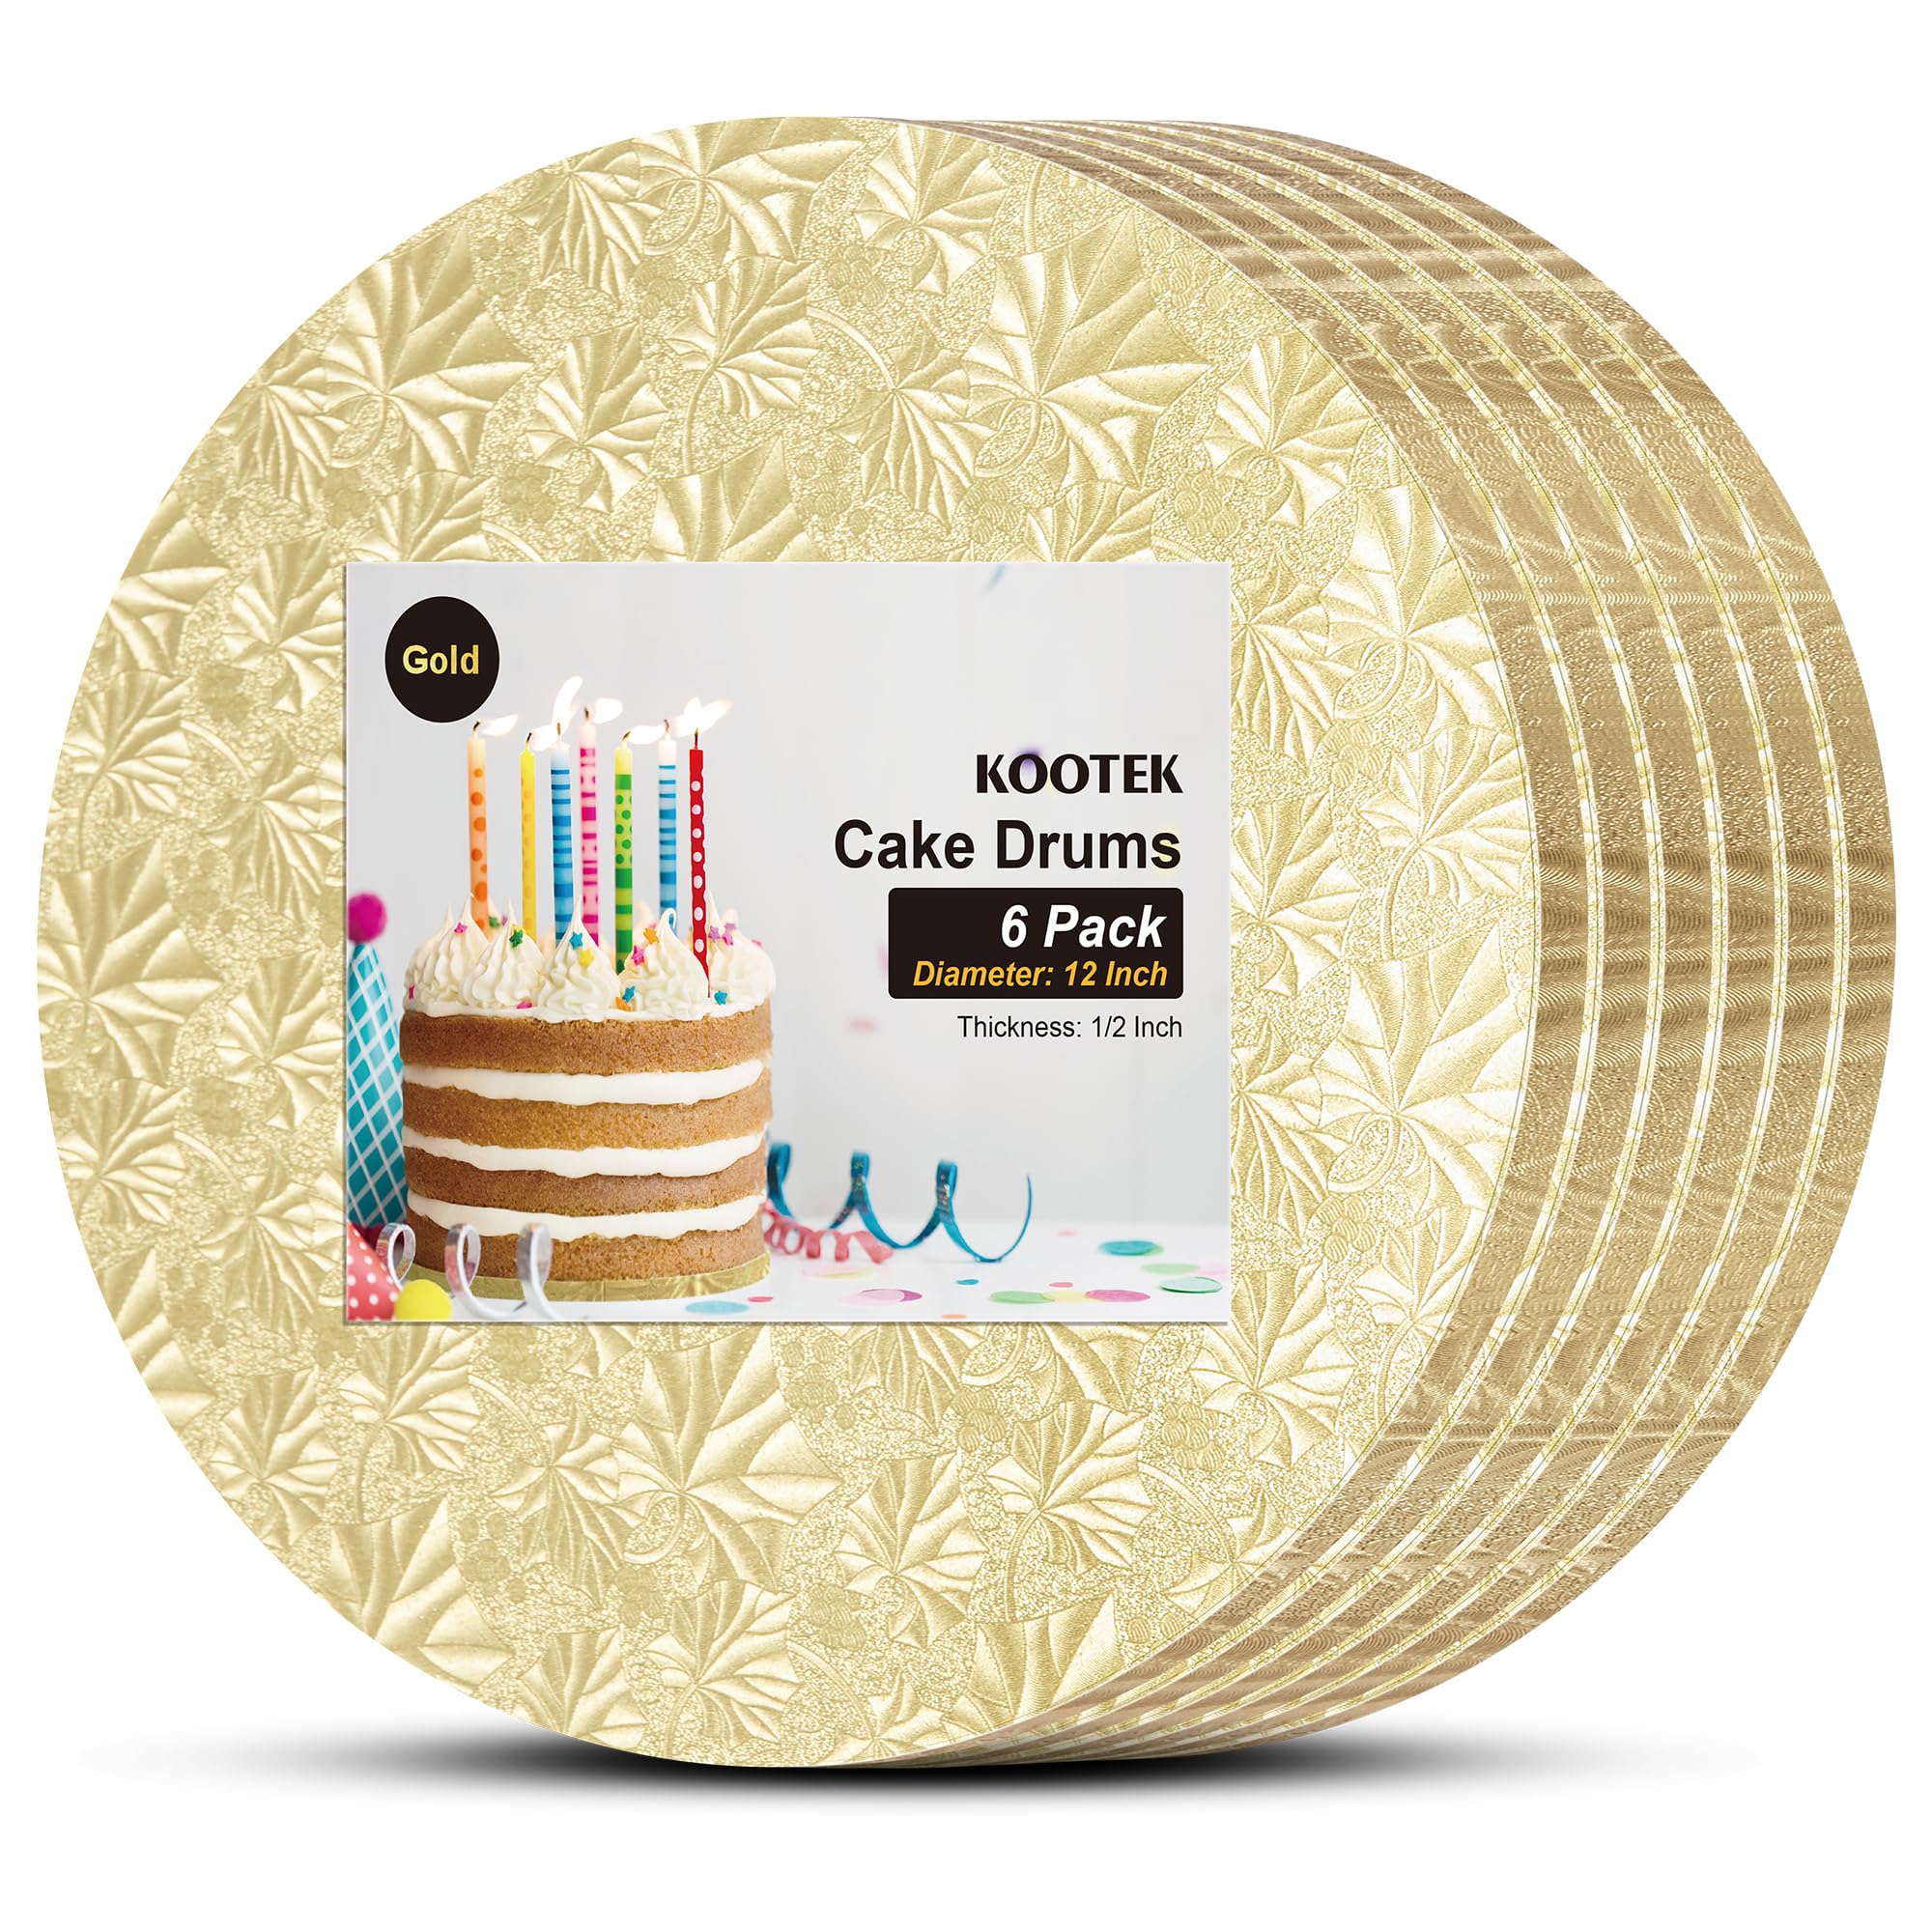 Kootek Cake Boards Drums 12 Inch Round, 1/2" Thick Cake Drums, Cake Decorating Supplies Sturdy Cake Corrugated Cardboard for Multi-Layer Cakes (Gold, 6 Pack)